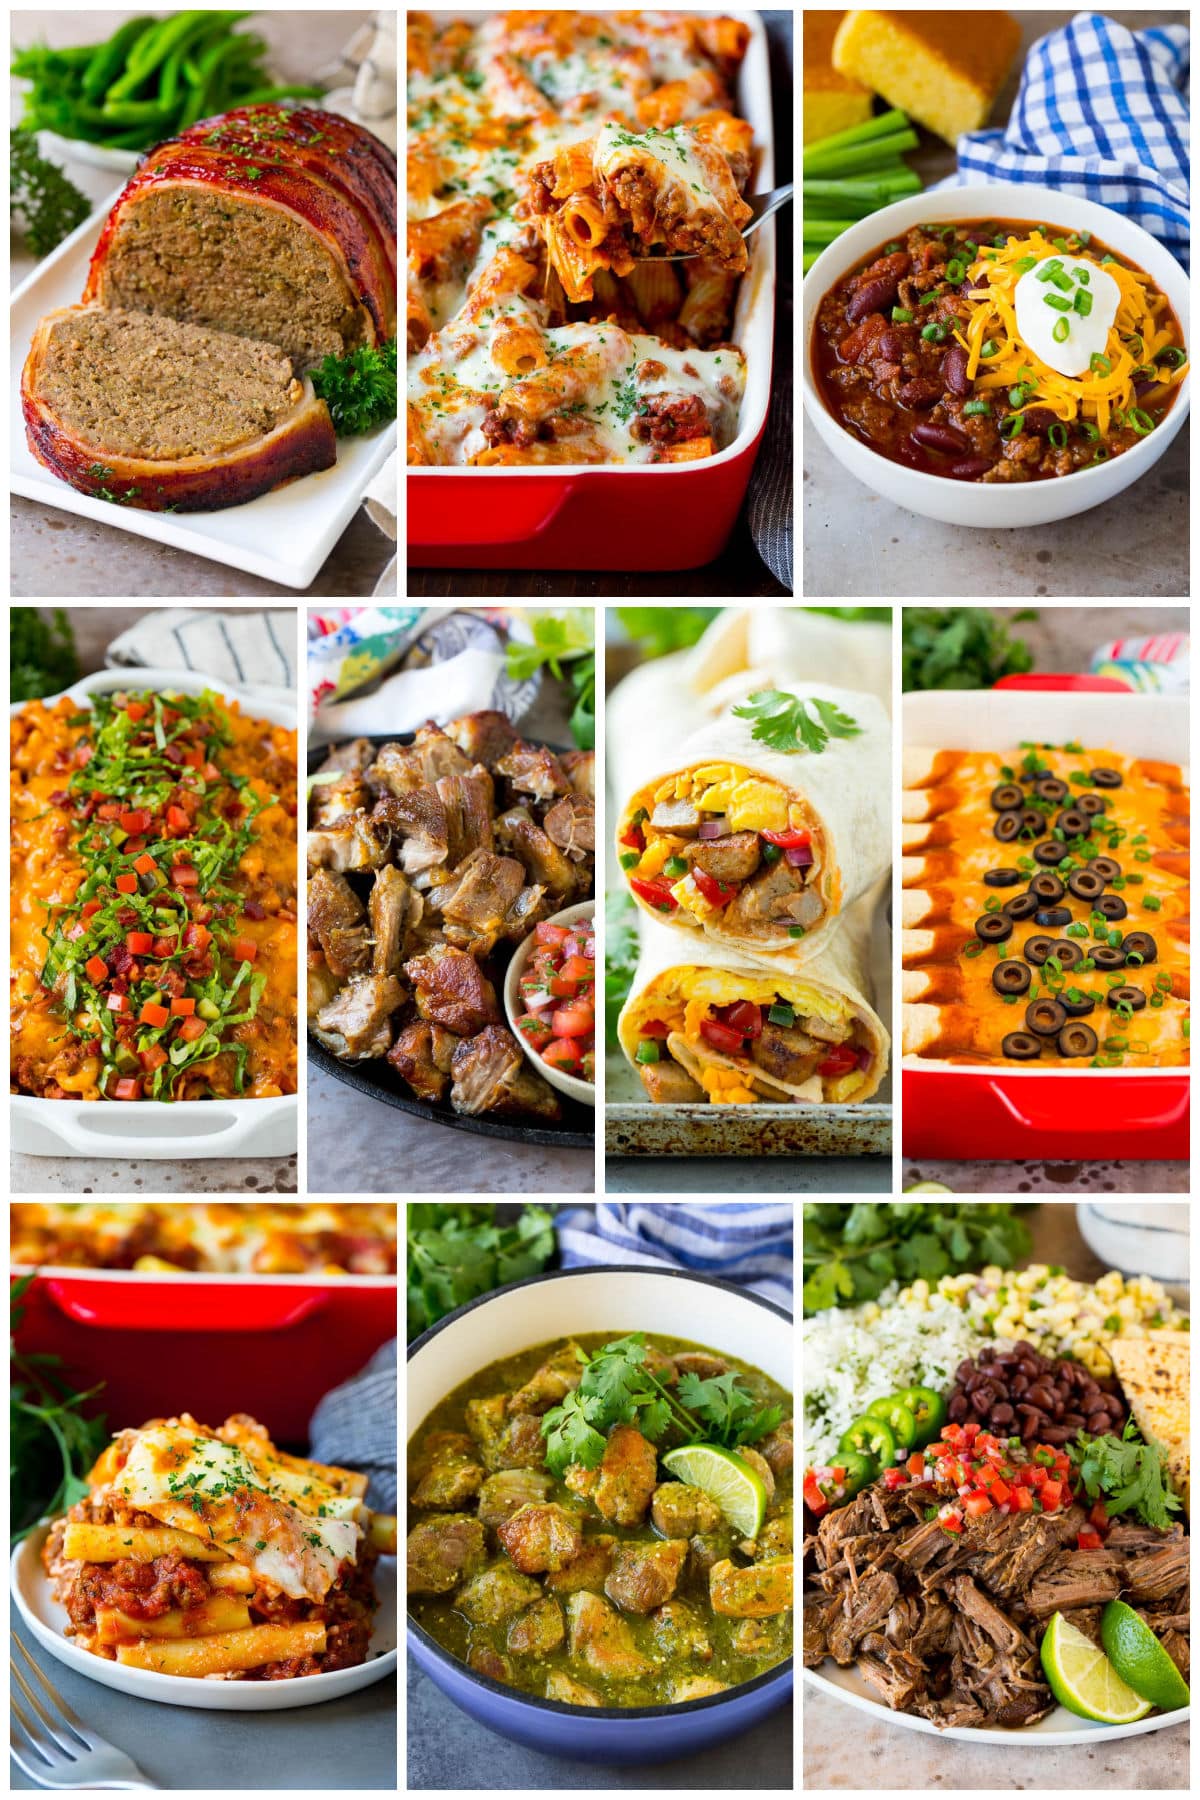 A group of freezer meal recipes like breakfast burritos, baked ziti and chile verde.